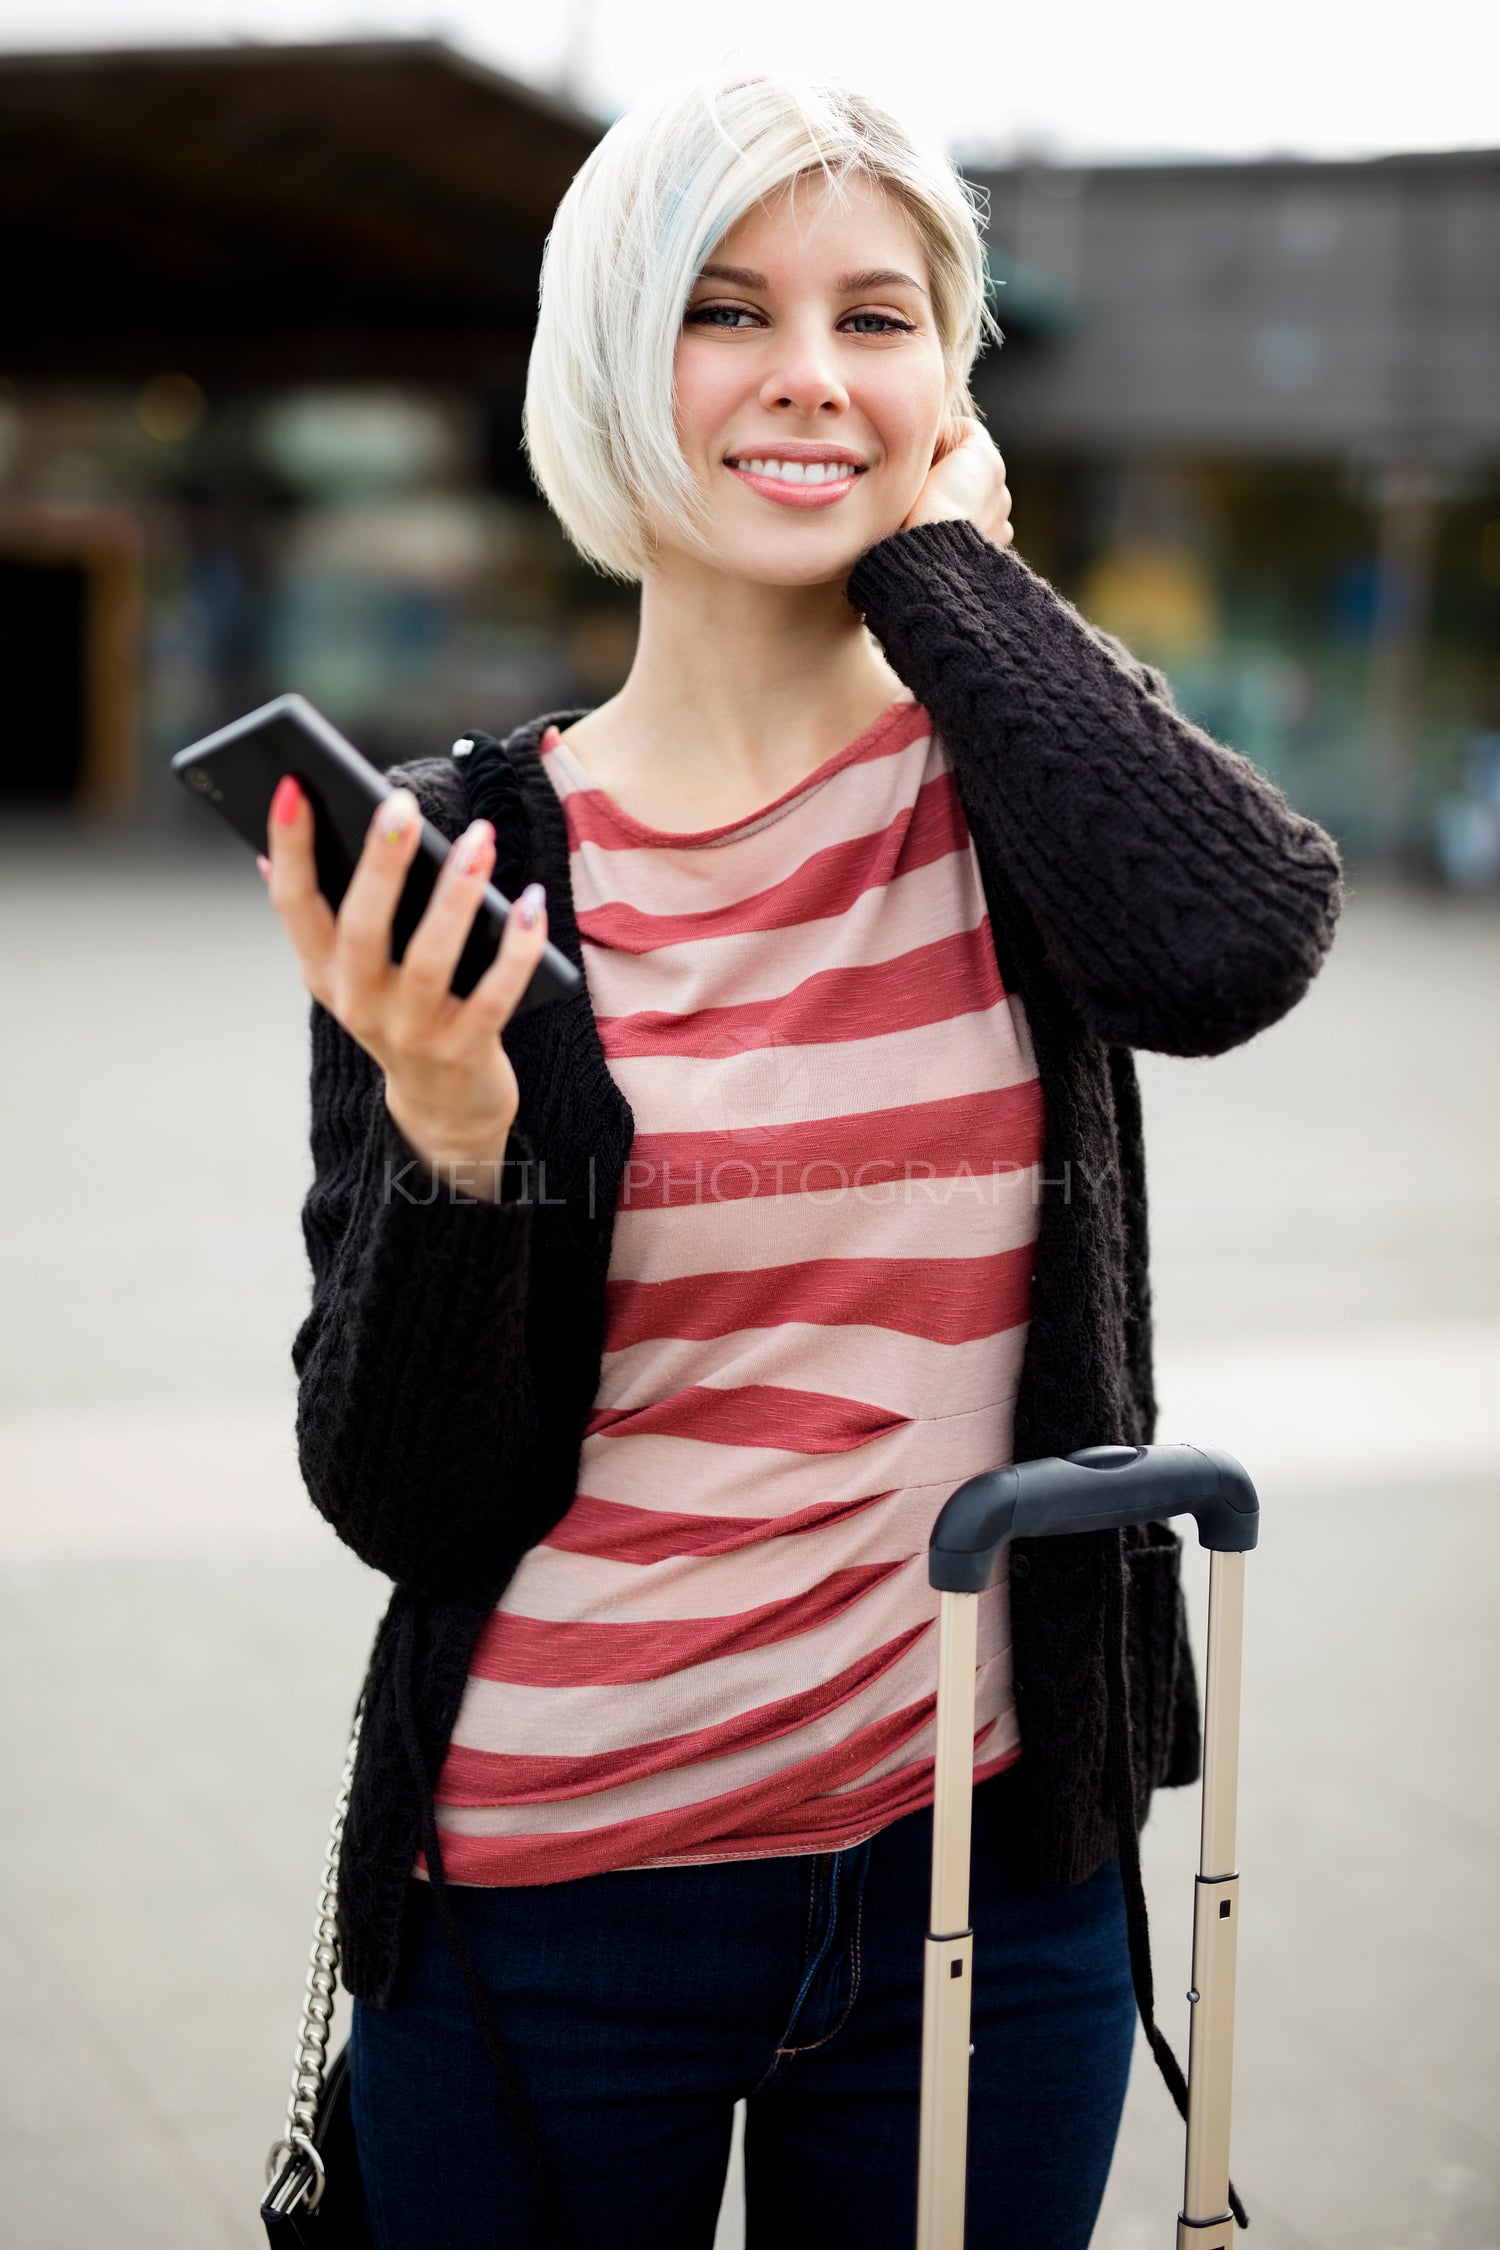 Smiling Young Woman Holding Smart Phone Outside Railroad Station